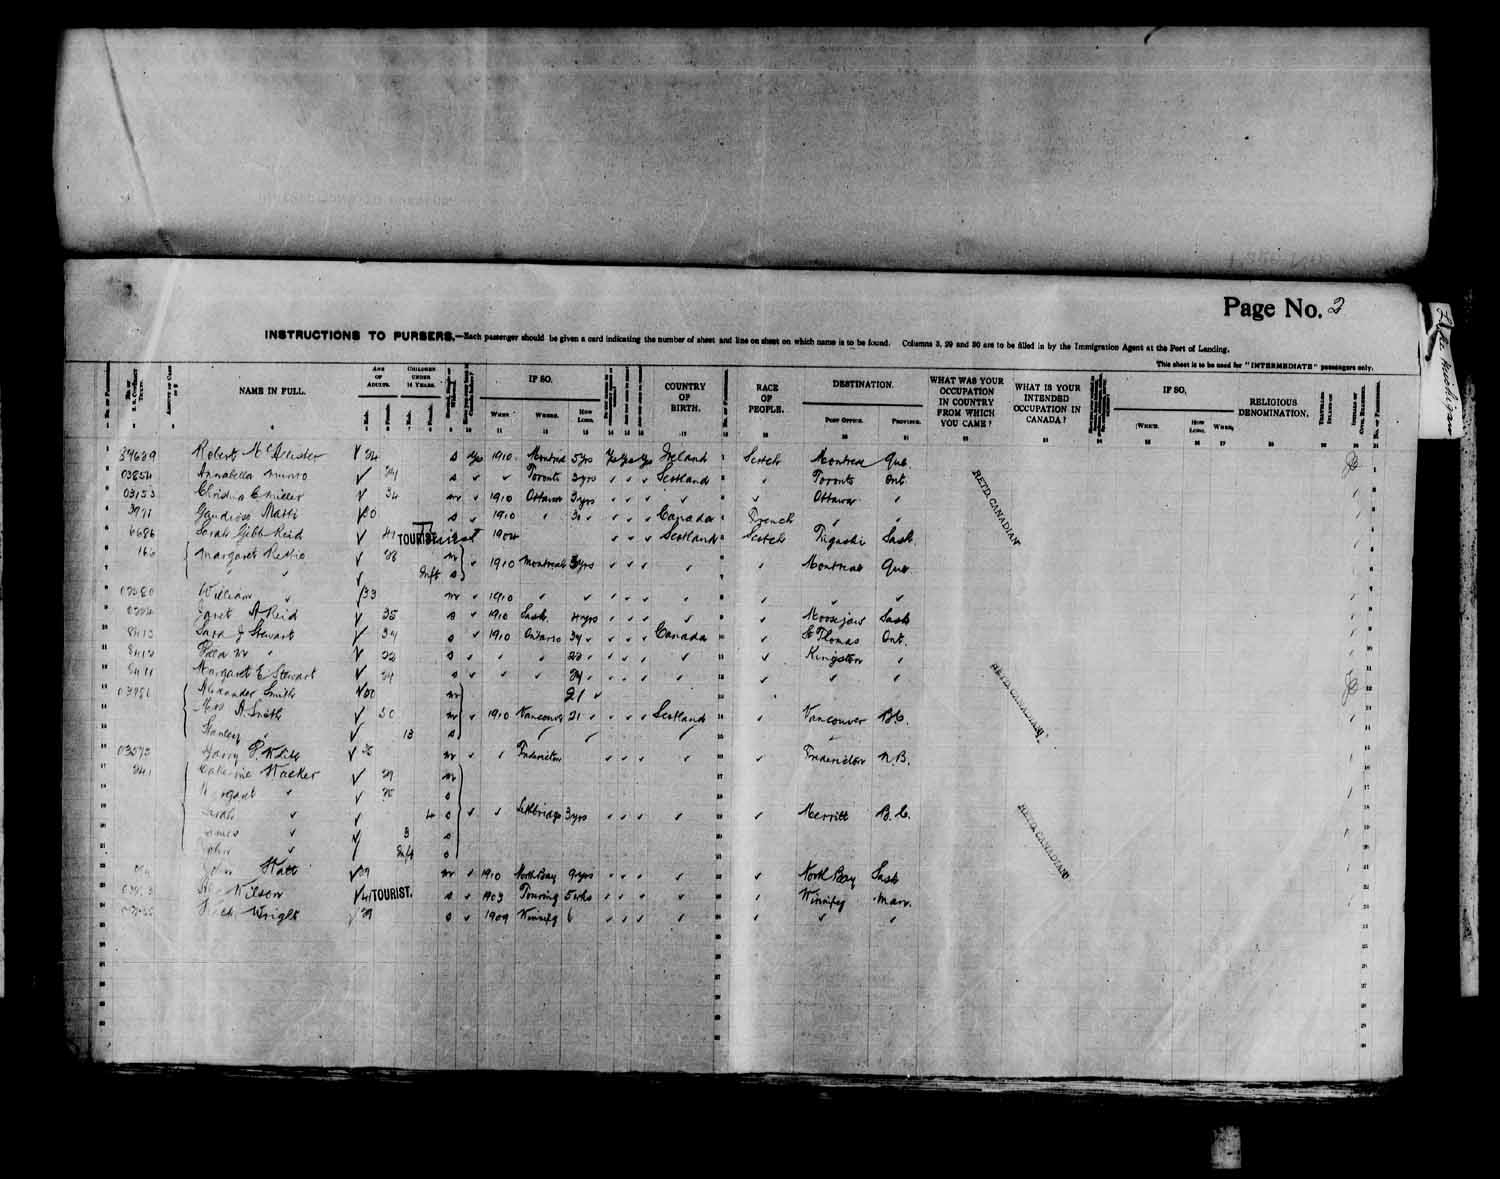 Digitized page of Passenger Lists for Image No.: e003566513